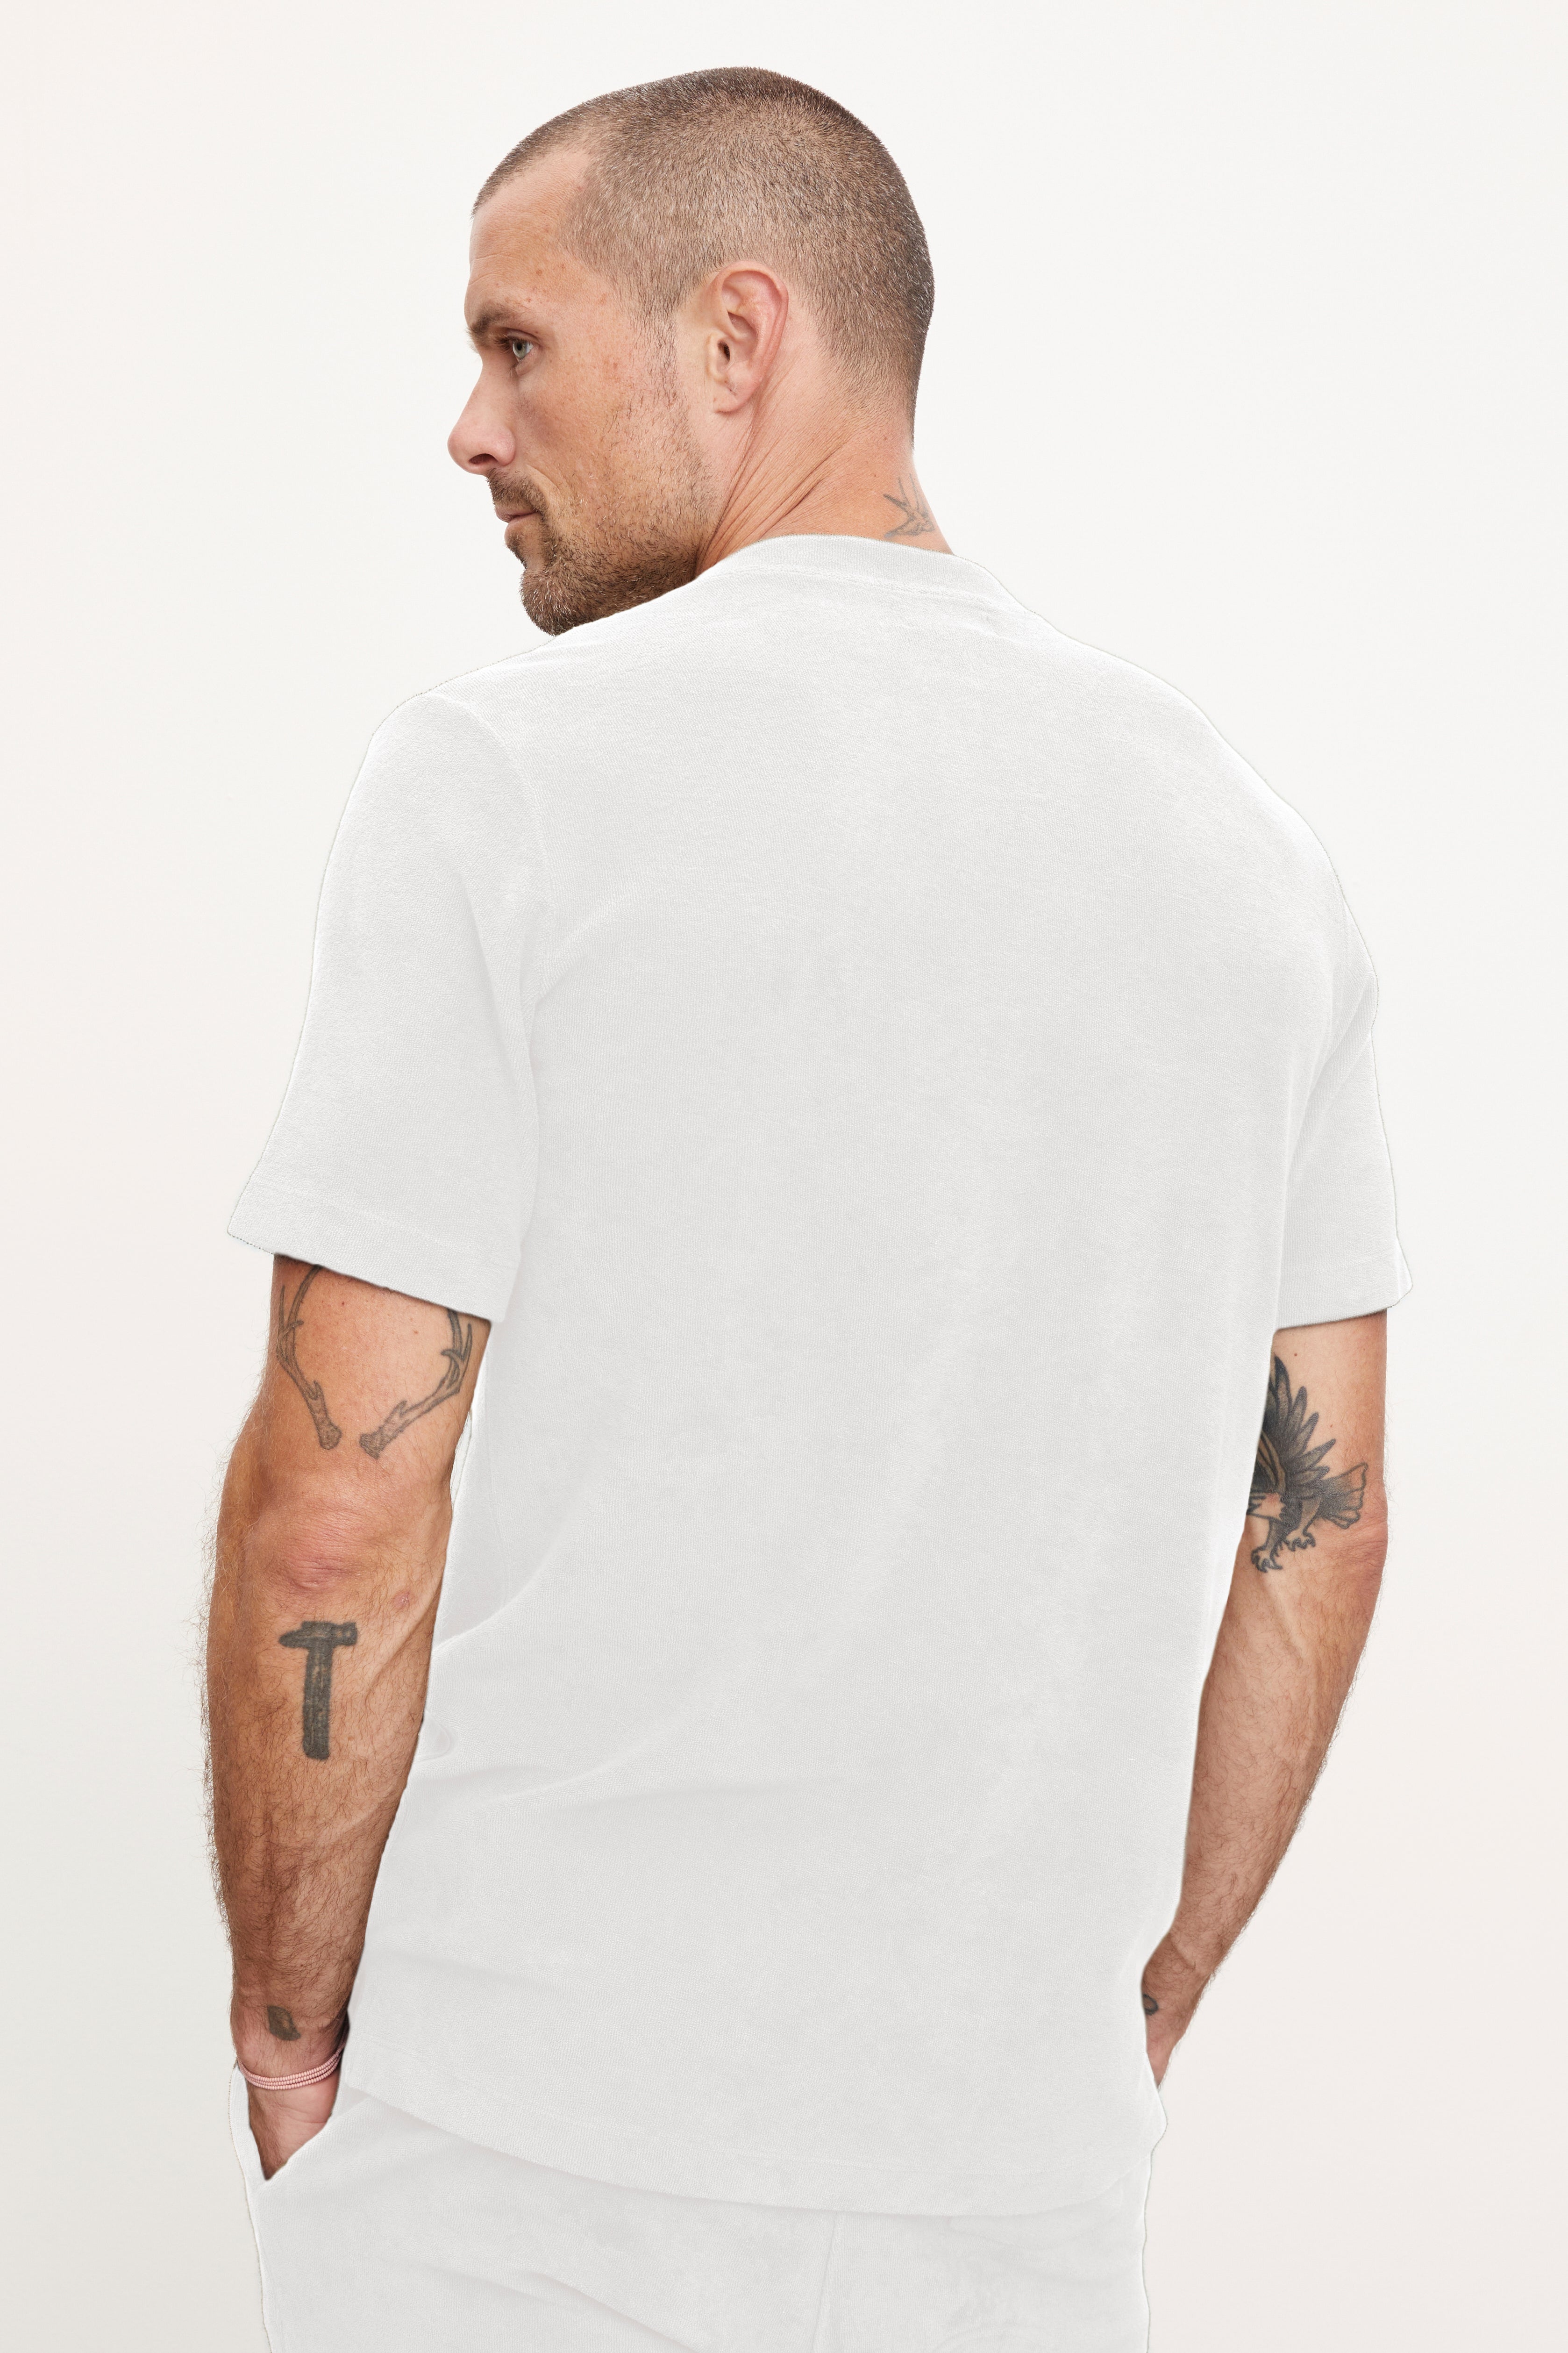   A man viewed from behind, wearing a Velvet by Graham & Spencer JAXON CREW t-shirt with a crew neckline, showing tattooed arms with visible designs, including a crucifix and a bird. 